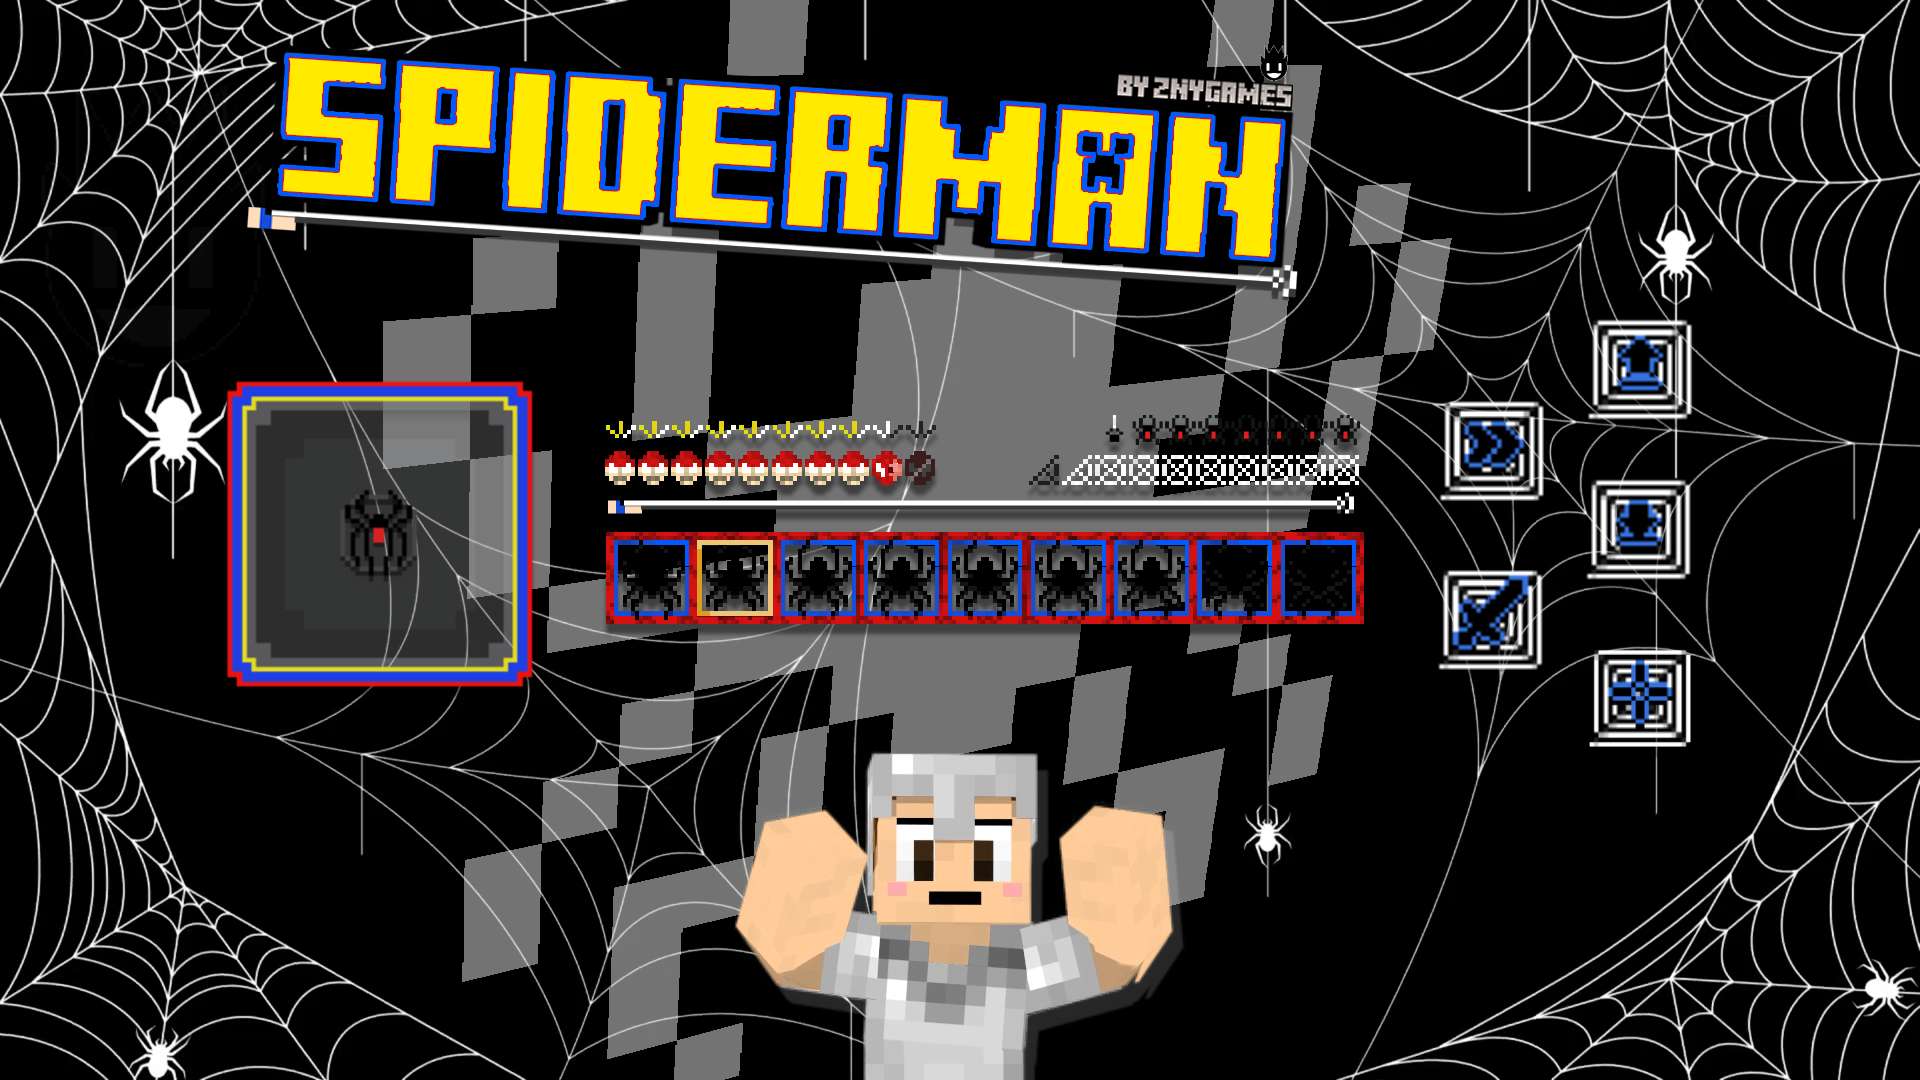 SPIDERMAN [BEDROCK] 16x by znygames on PvPRP